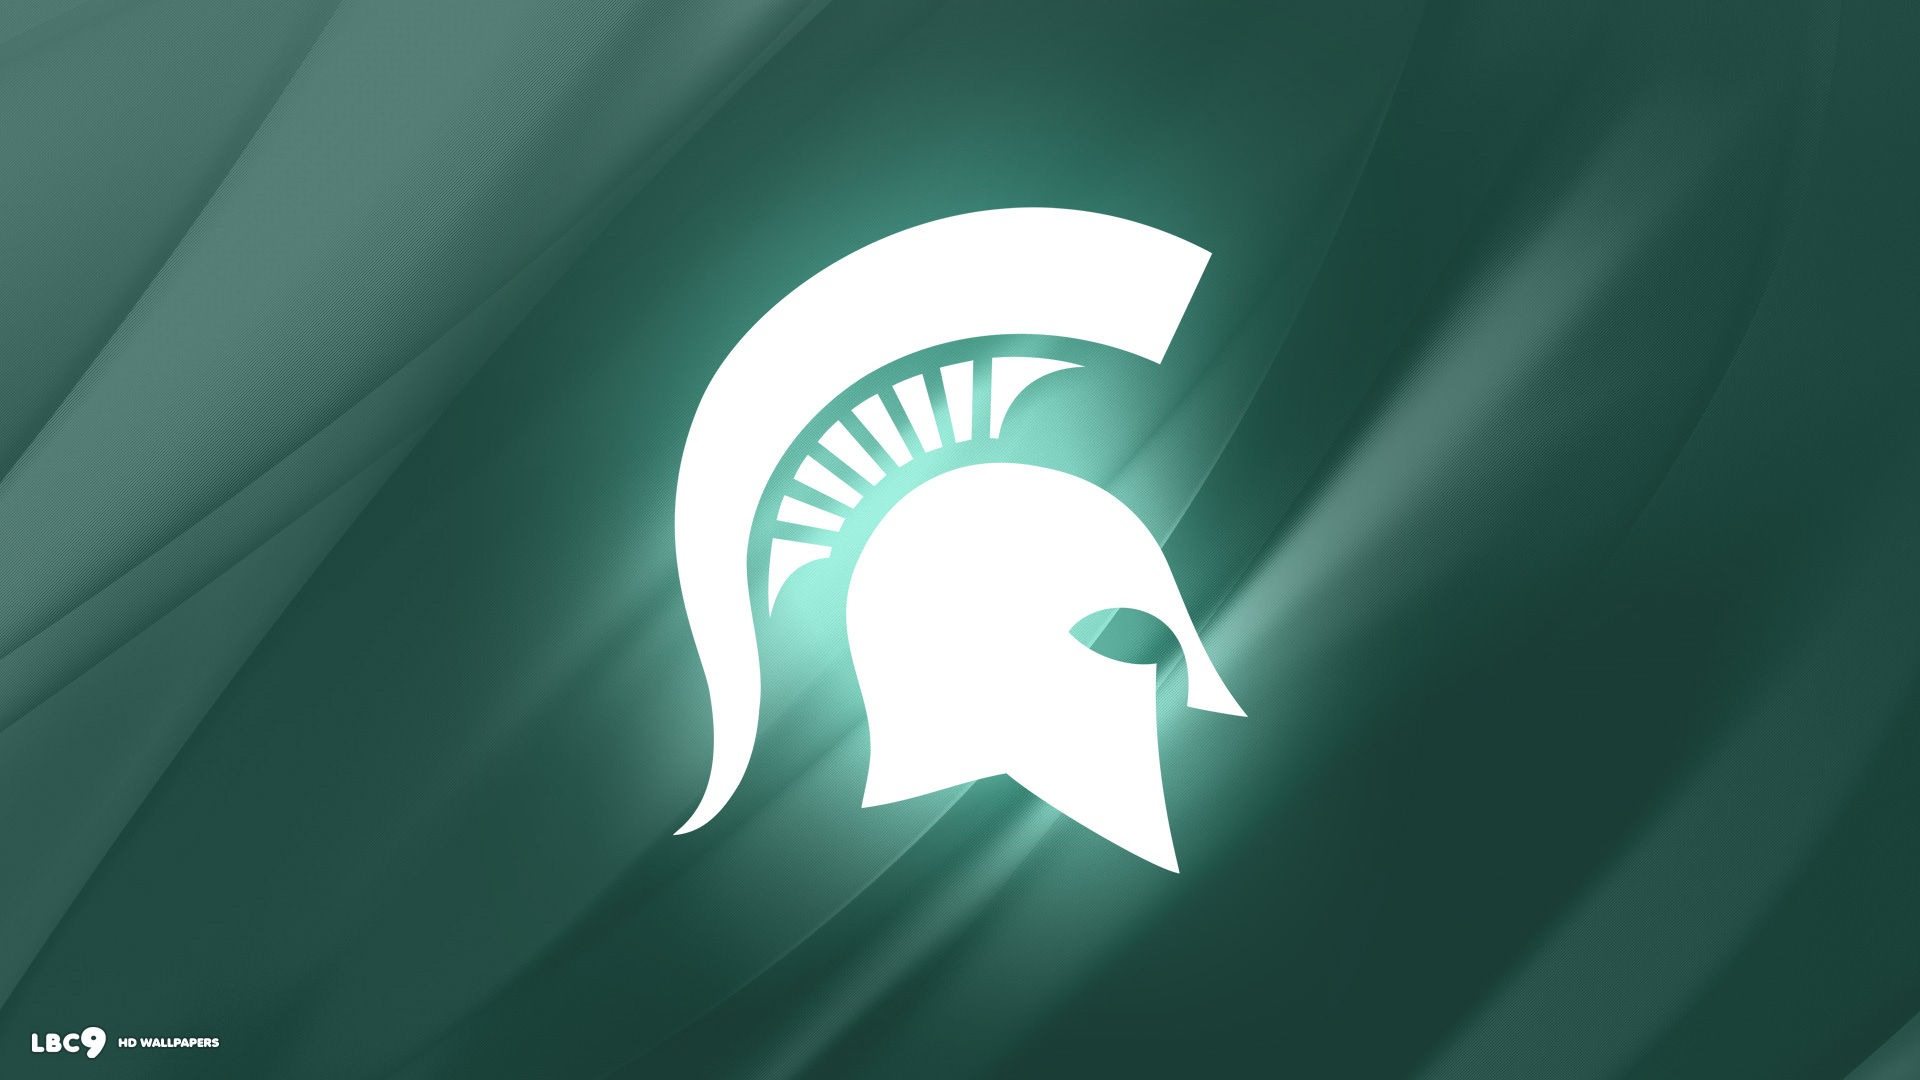 Michigan State Spartans Wallpaper By Lbc9 Maguzz